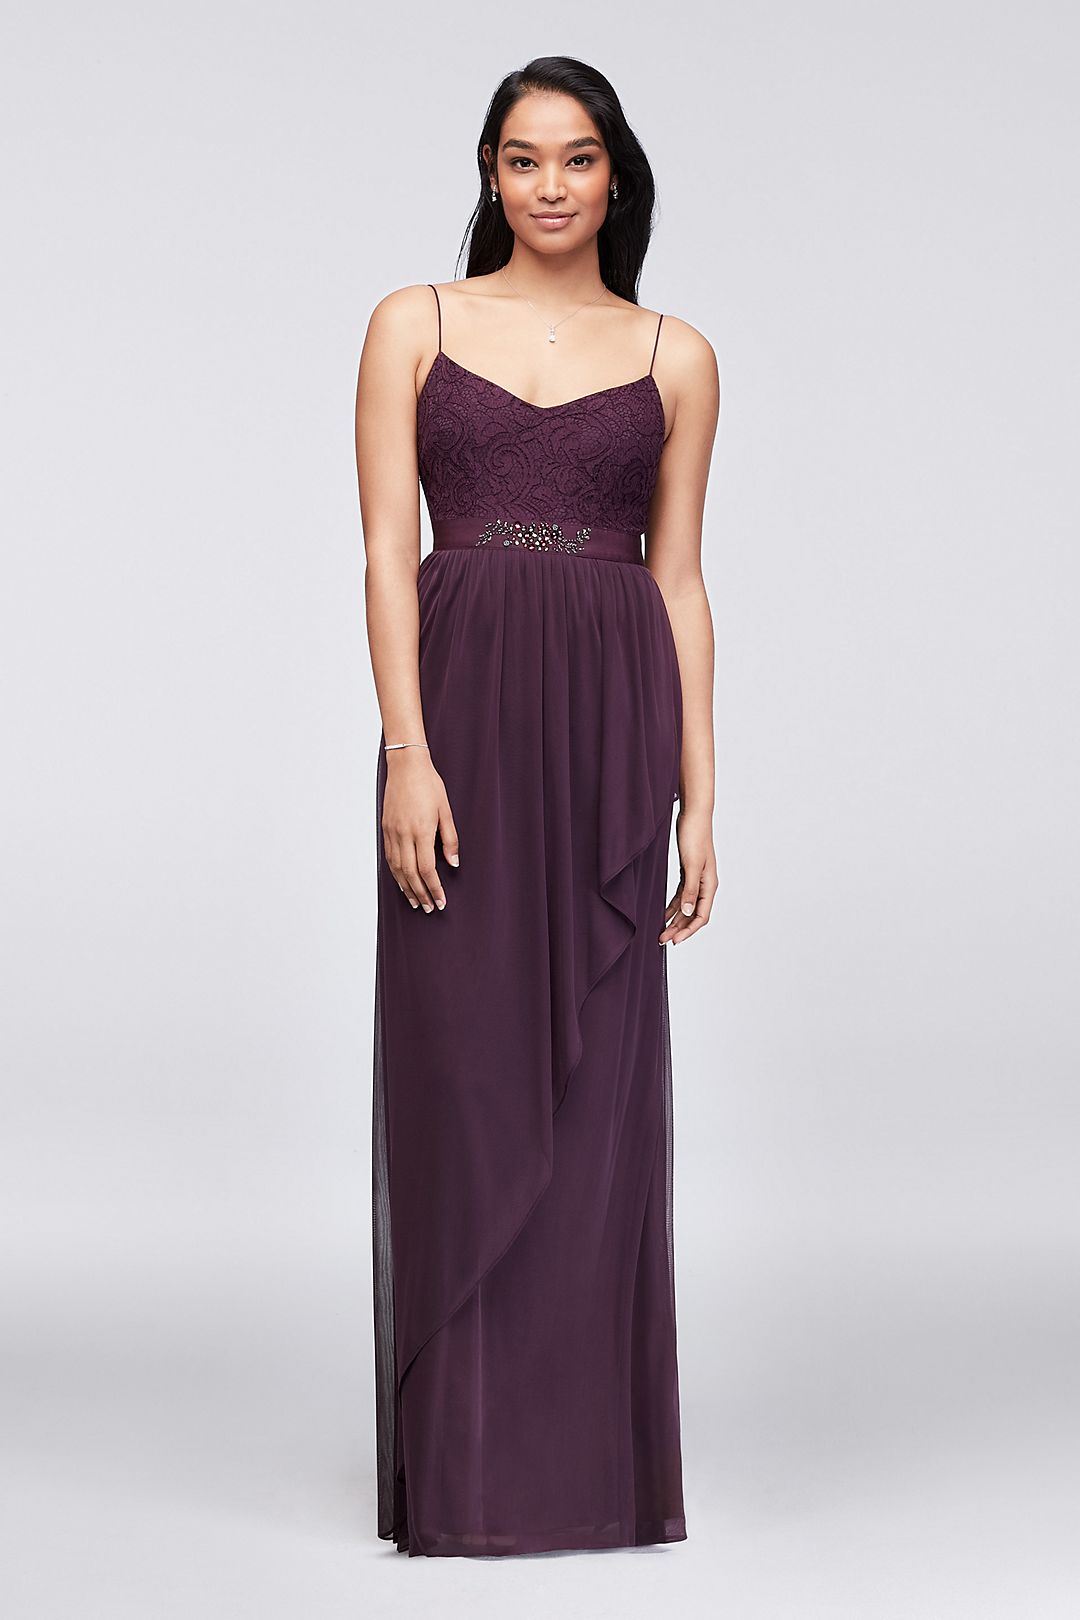 Lace and Cascading Mesh Bridesmaid Dress Image 1